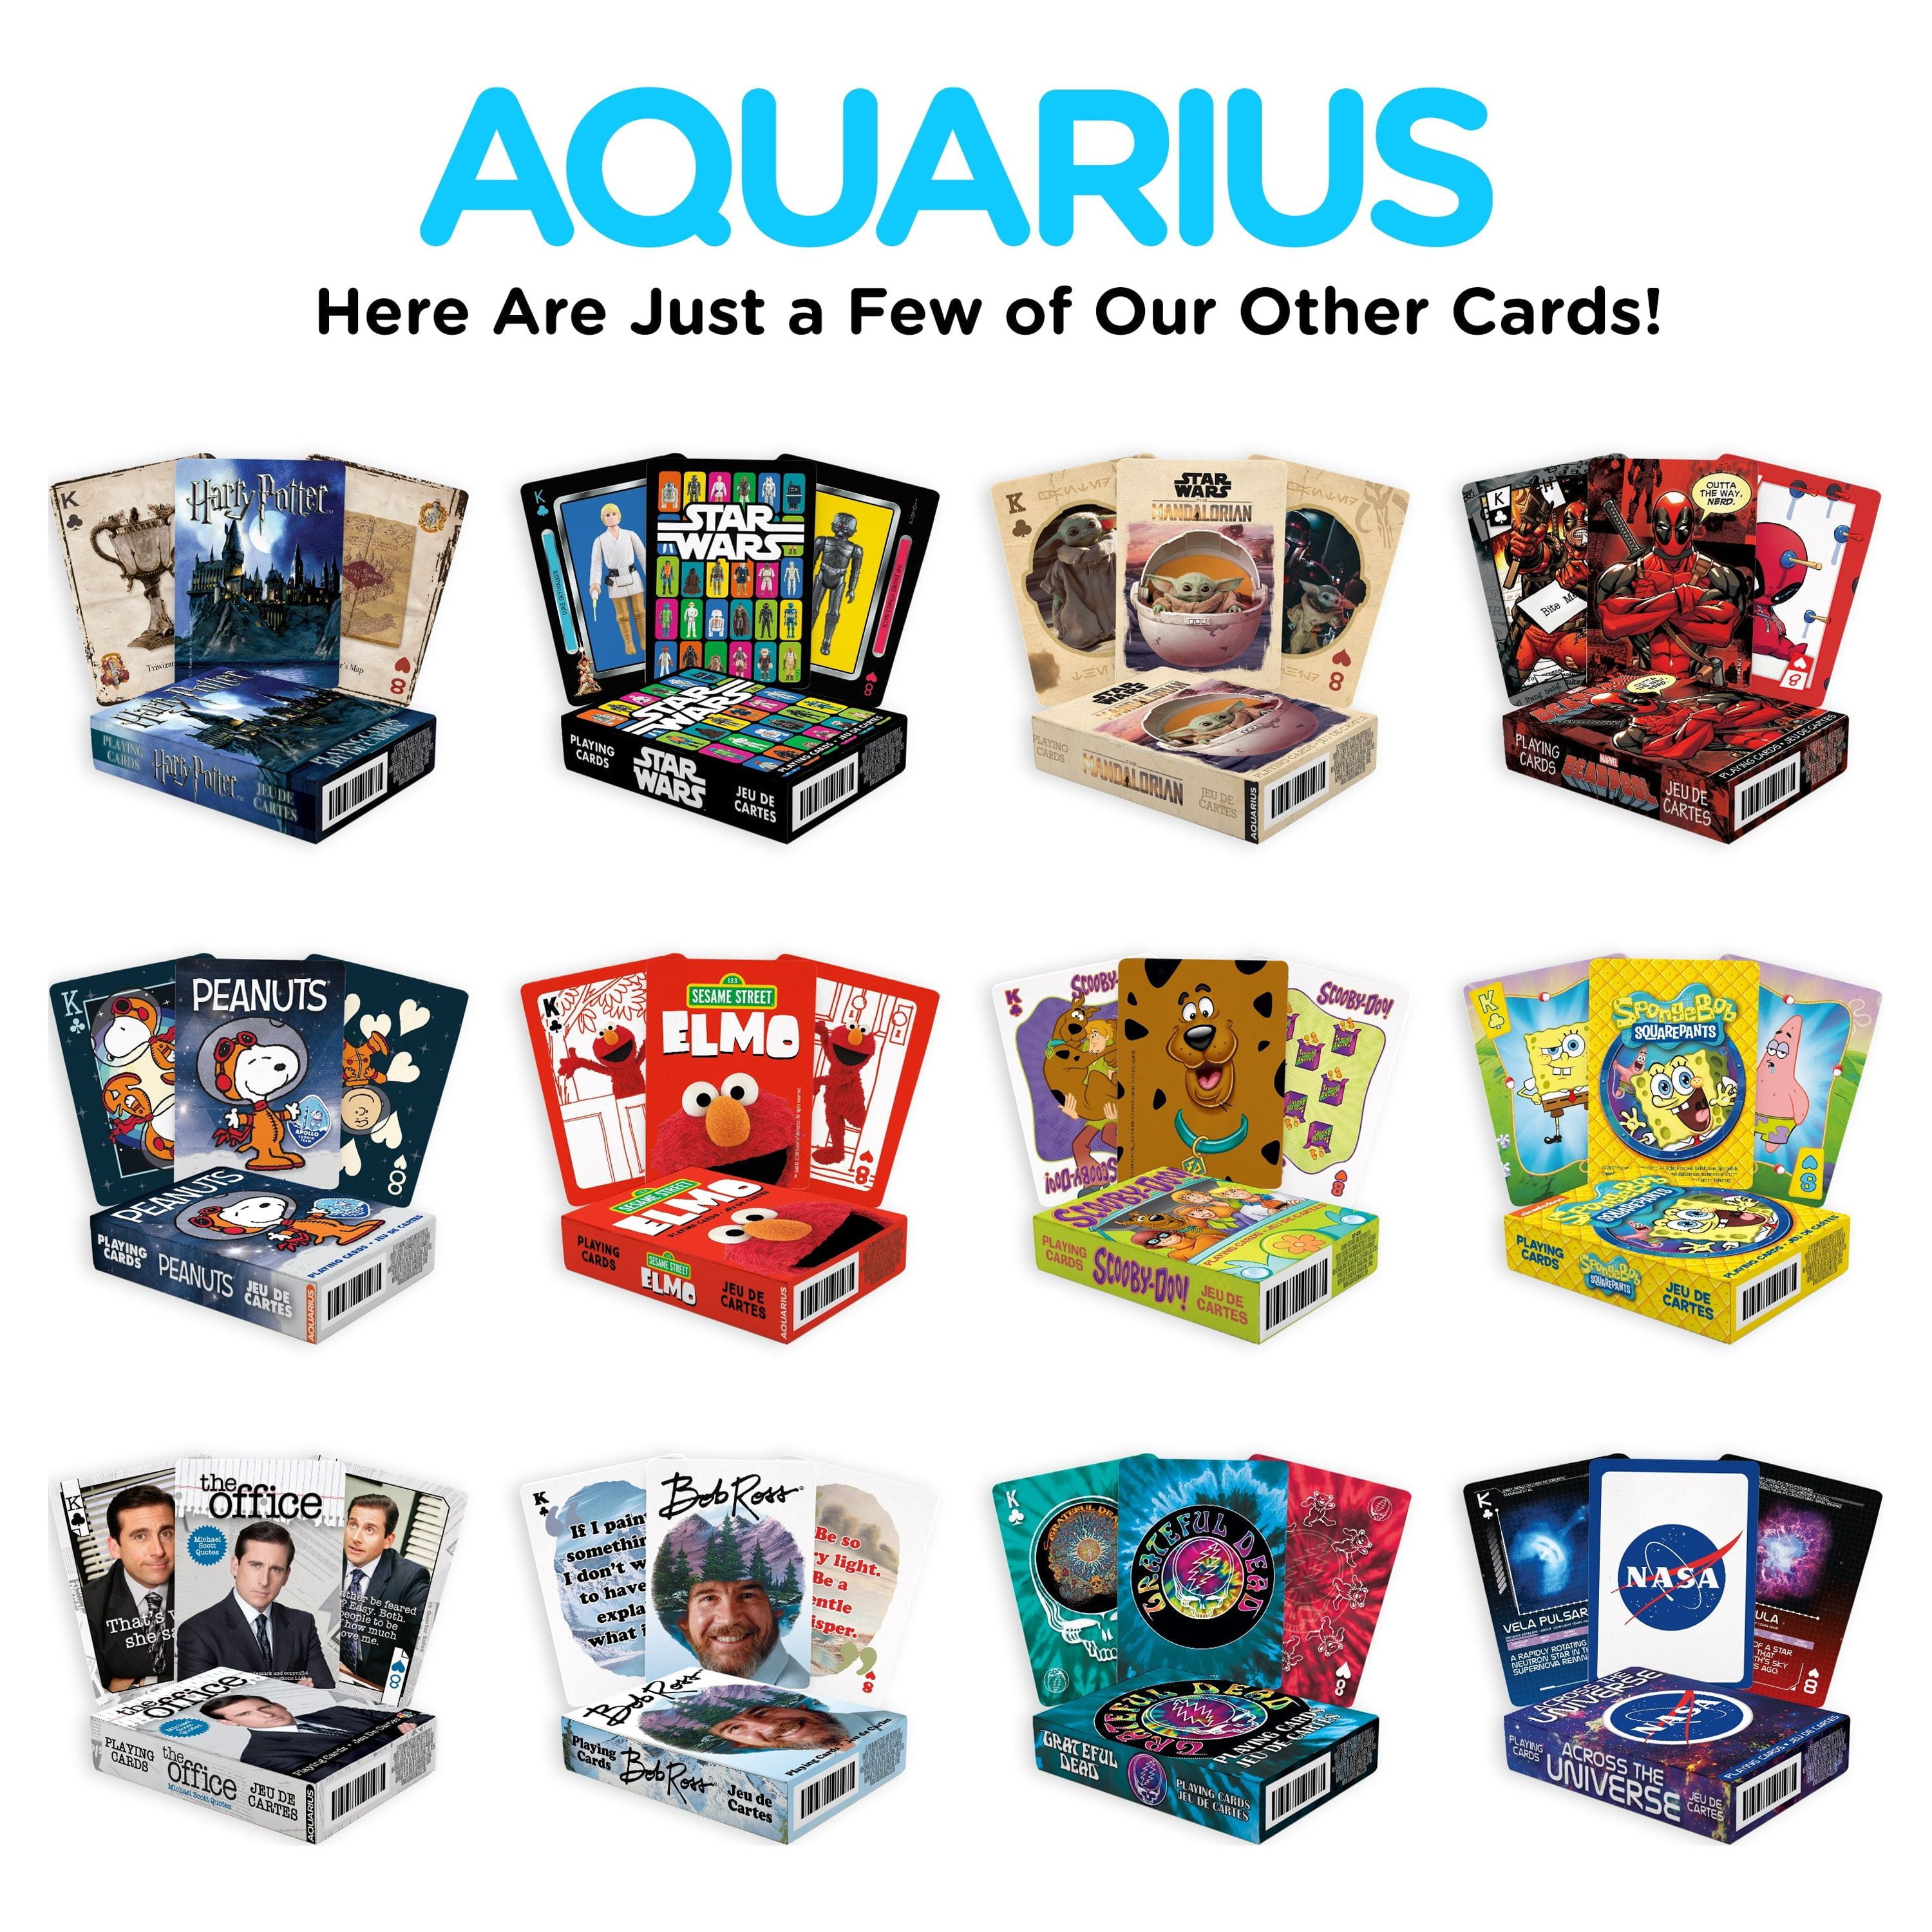  AQUARIUS Harry Potter Honey Dukes Playing Cards – Harry Potter  Themed Deck of Cards for Your Favorite Card Games - Officially Licensed  Harry Potter Merchandise & Collectibles : Toys & Games